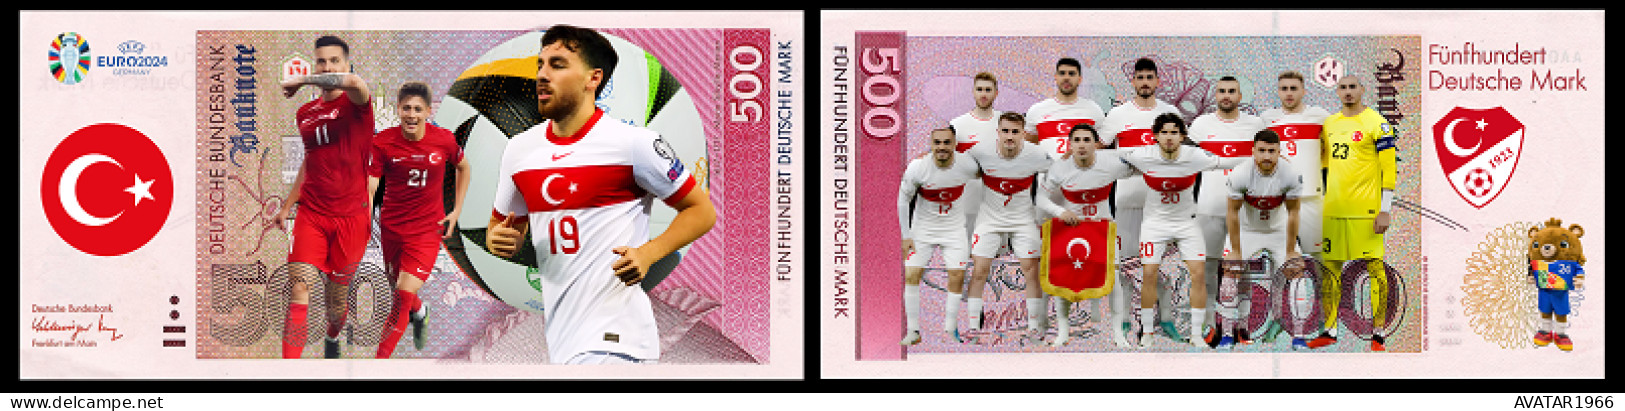 UEFA European Football Championship 2024 qualified country Turkey 8 pieces Germany fantasy paper money